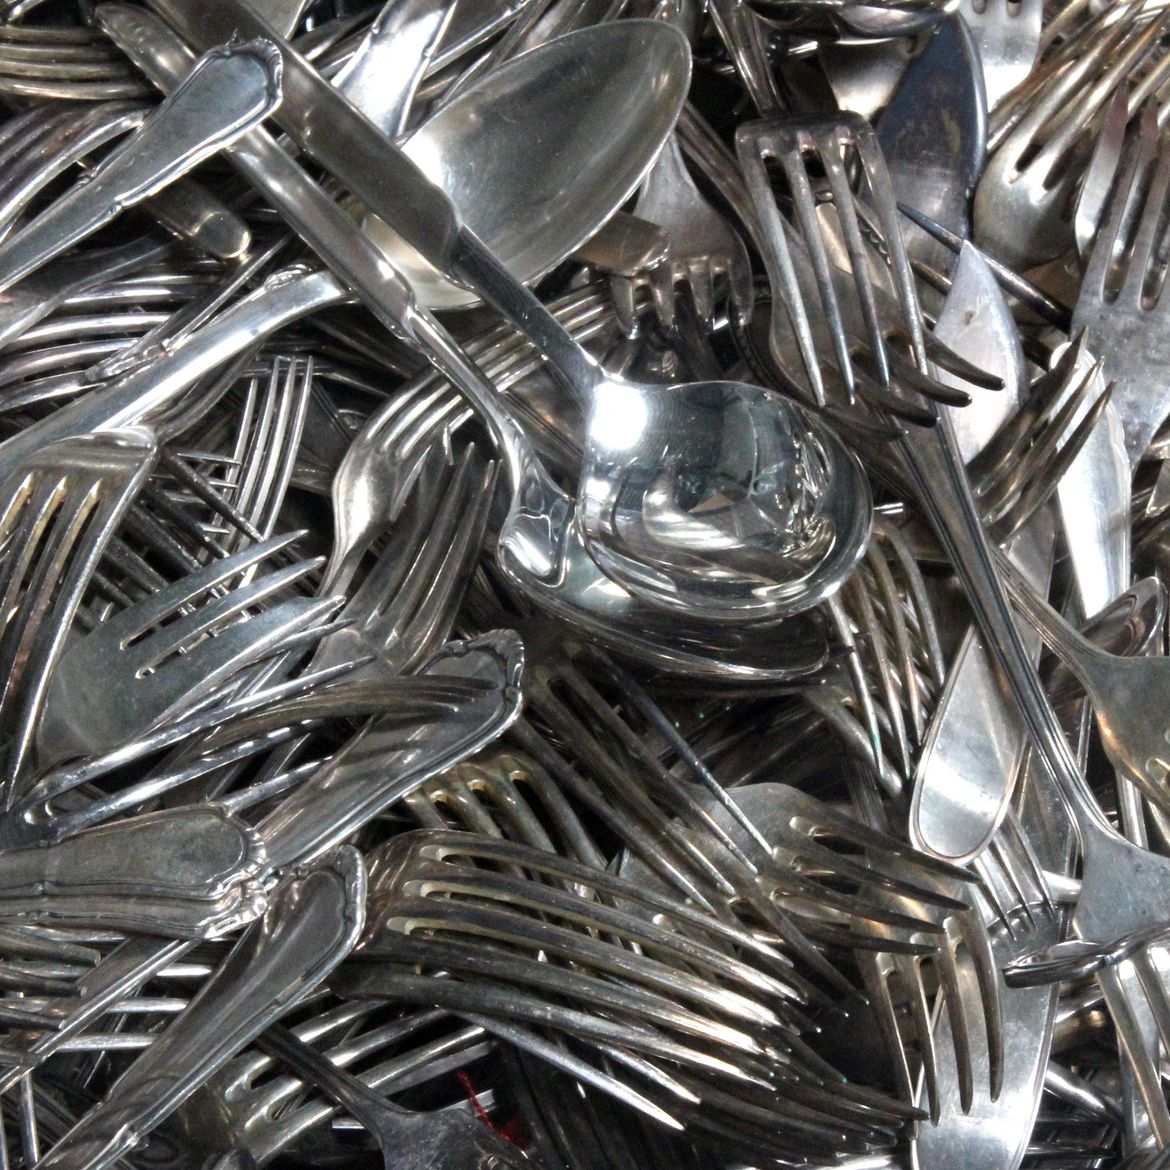 Purchase of silver cutlery / silverware